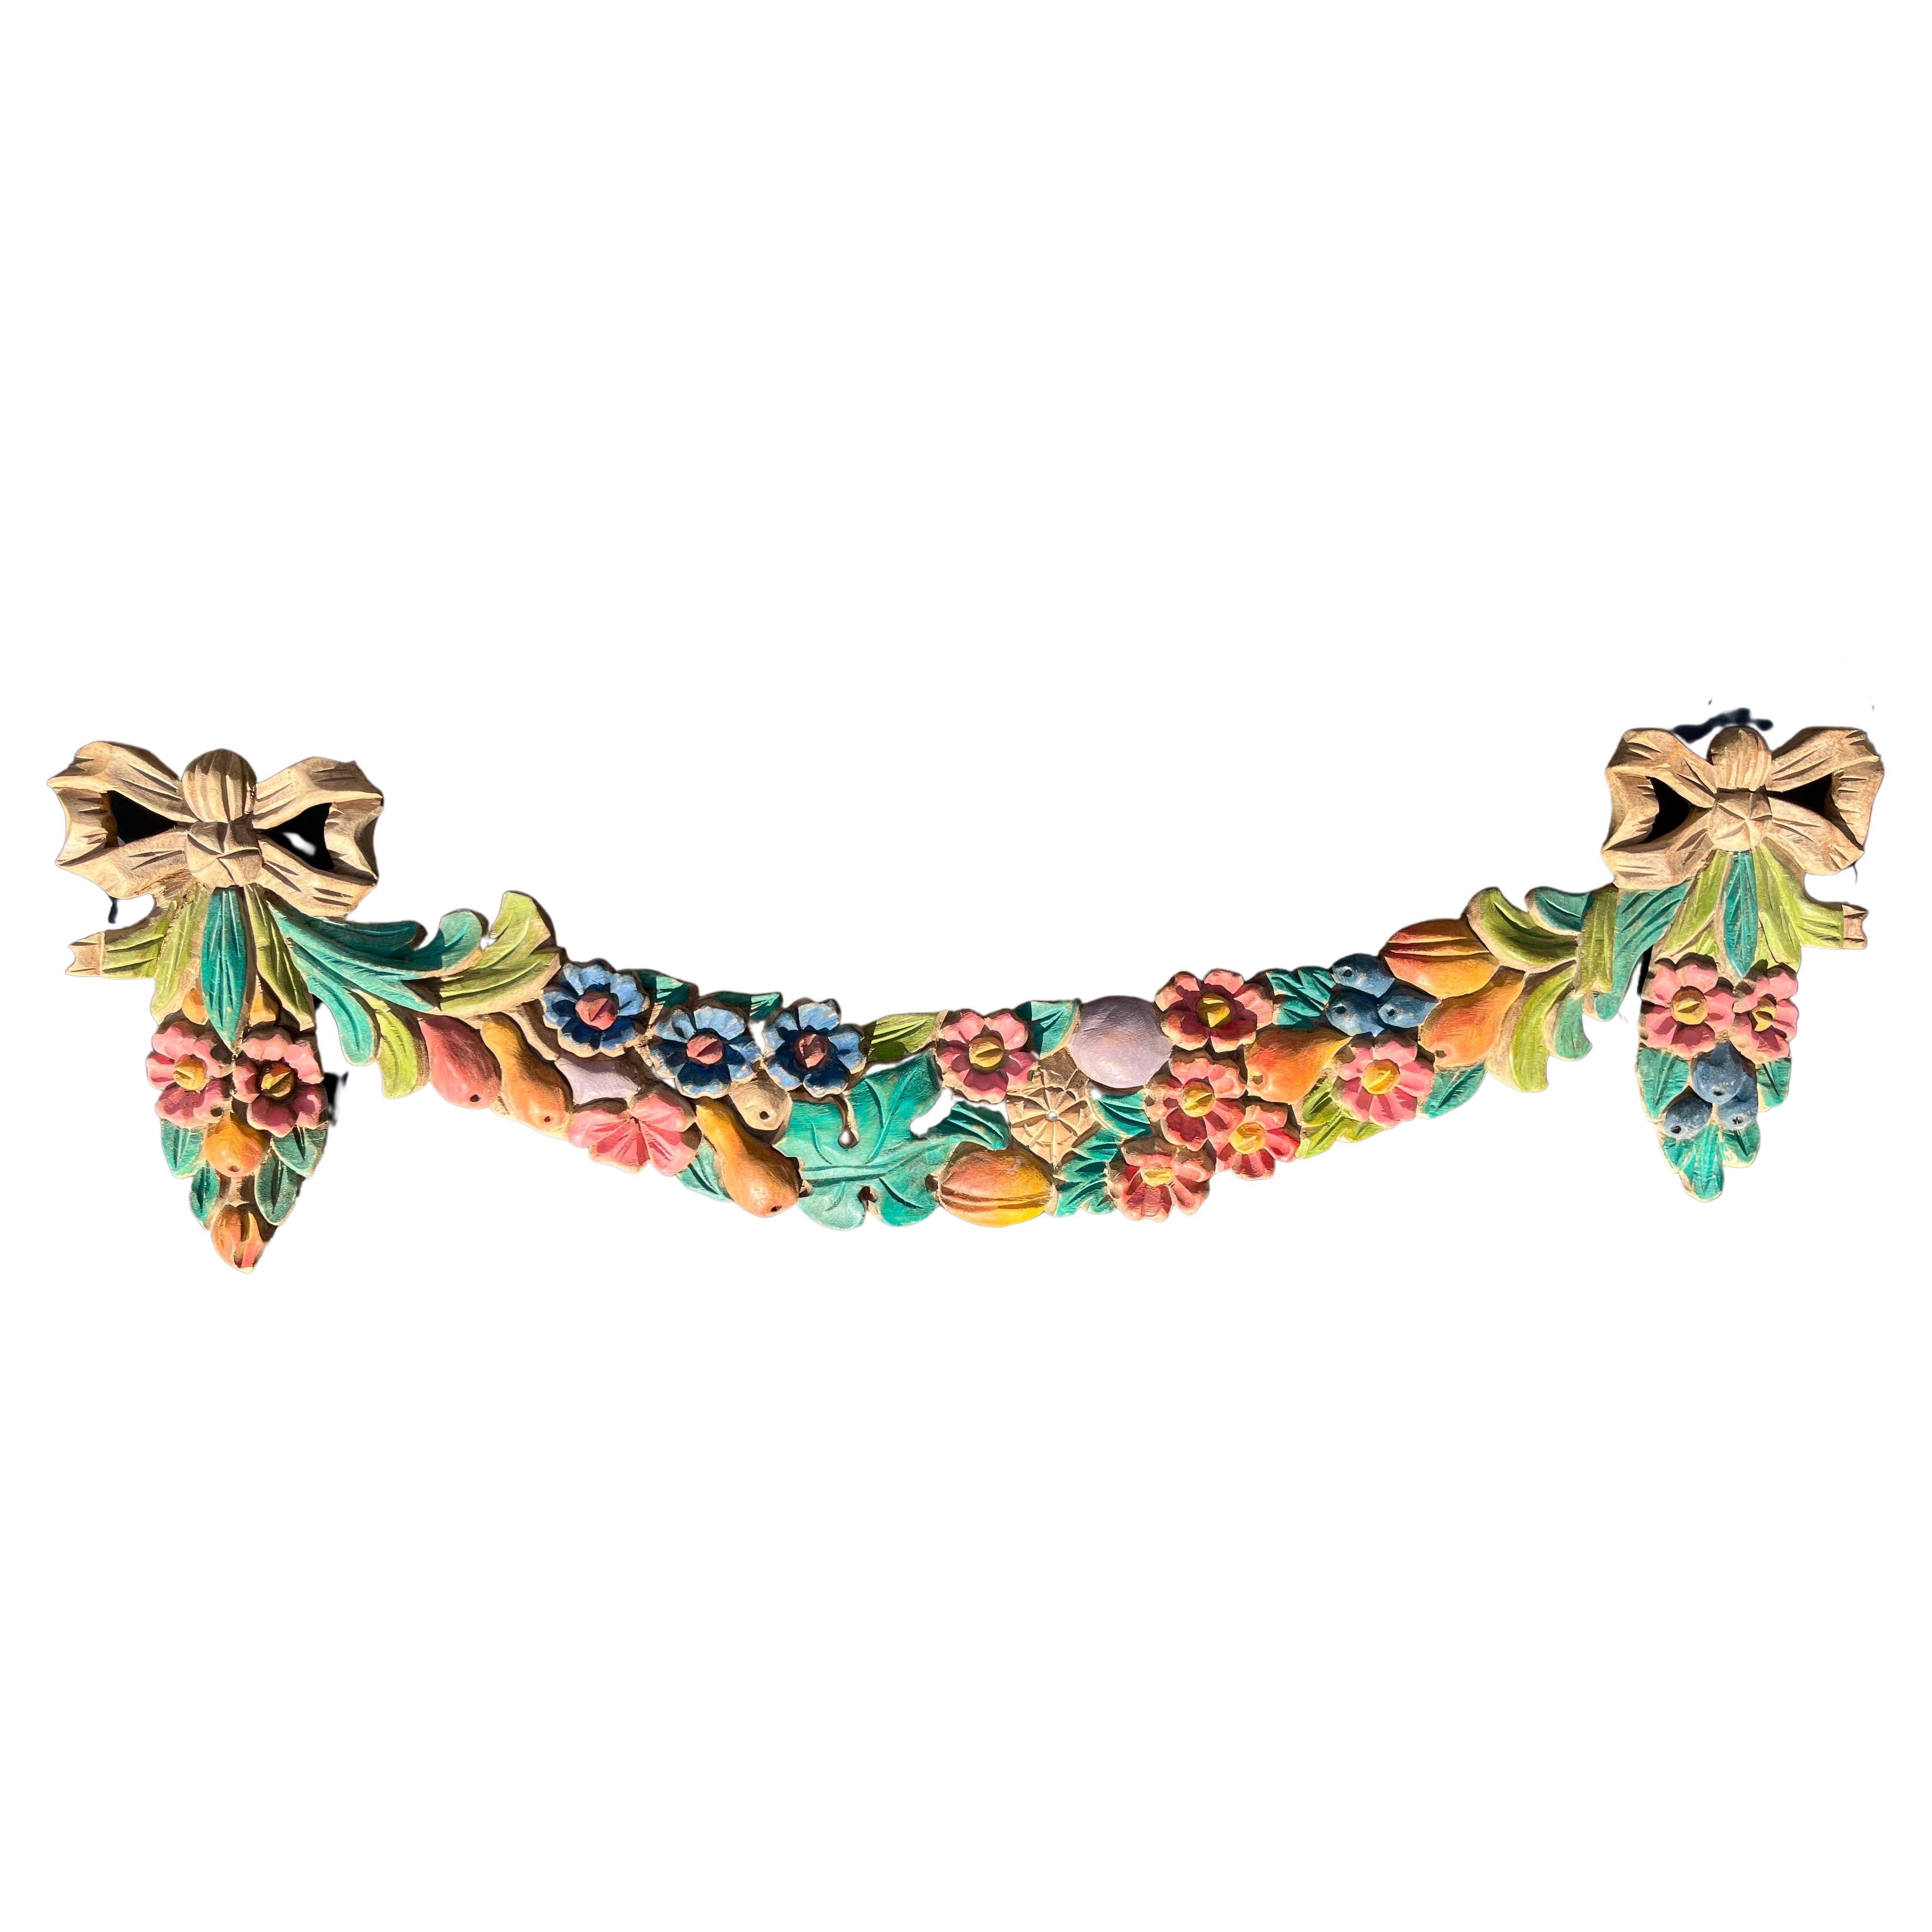 Polychromed Classical Styled Carved Garland or Festoon  For Sale